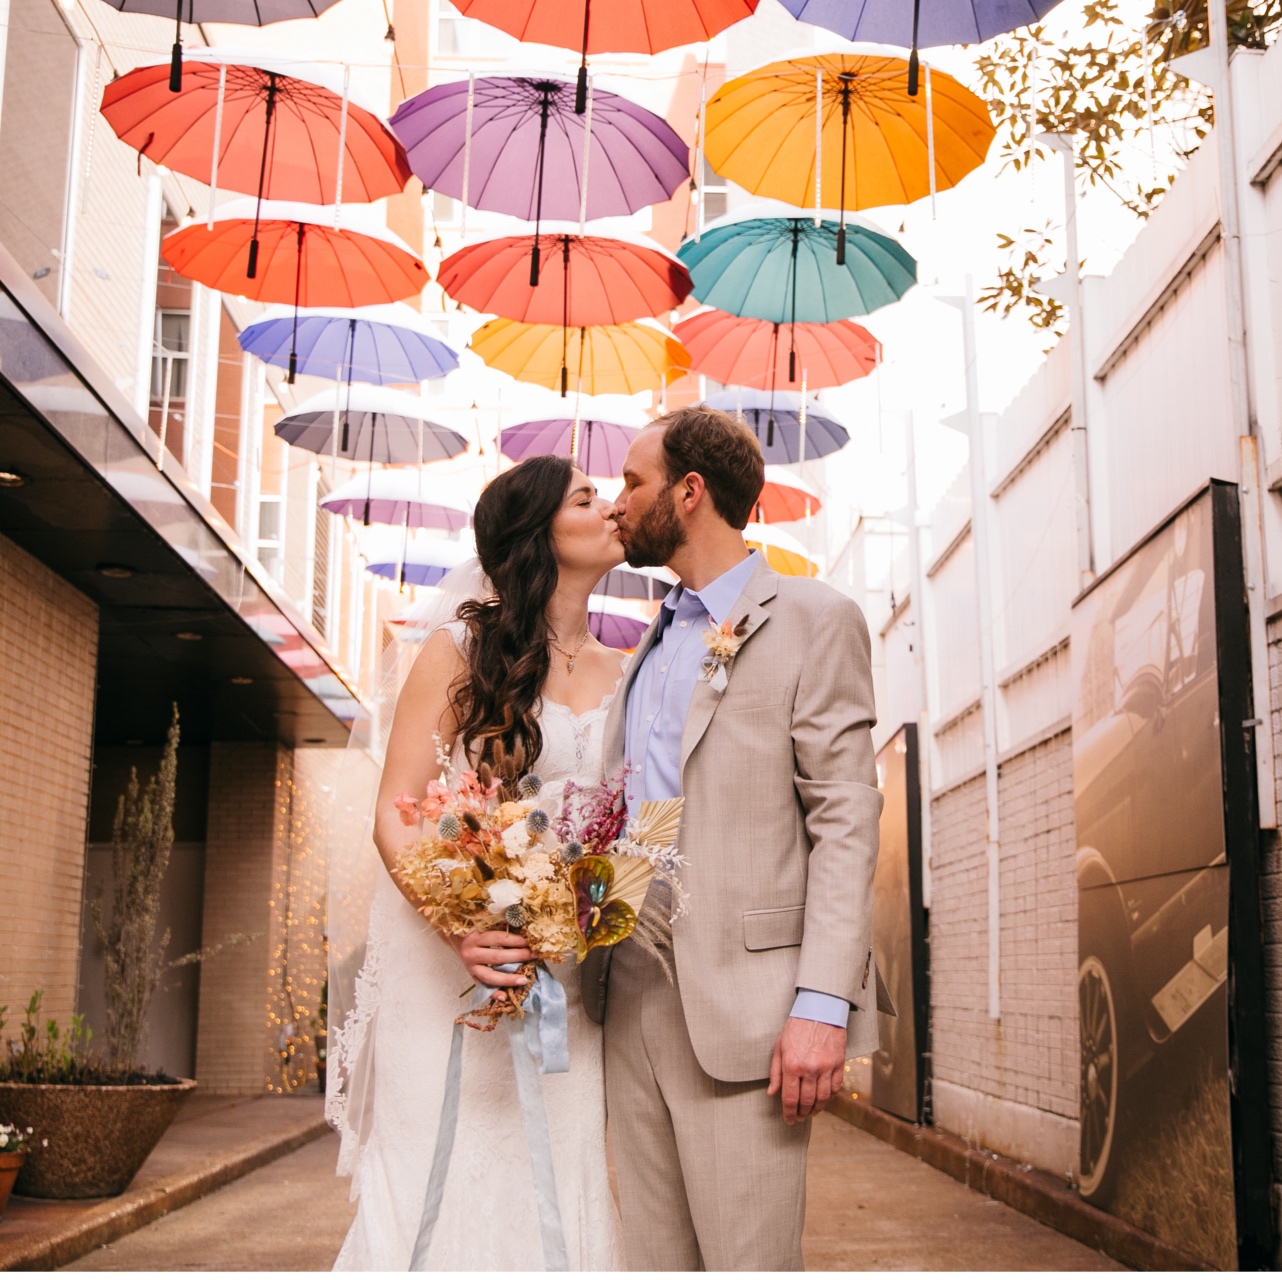 Bride and groom kiss in an alley under an umbrella canopy.